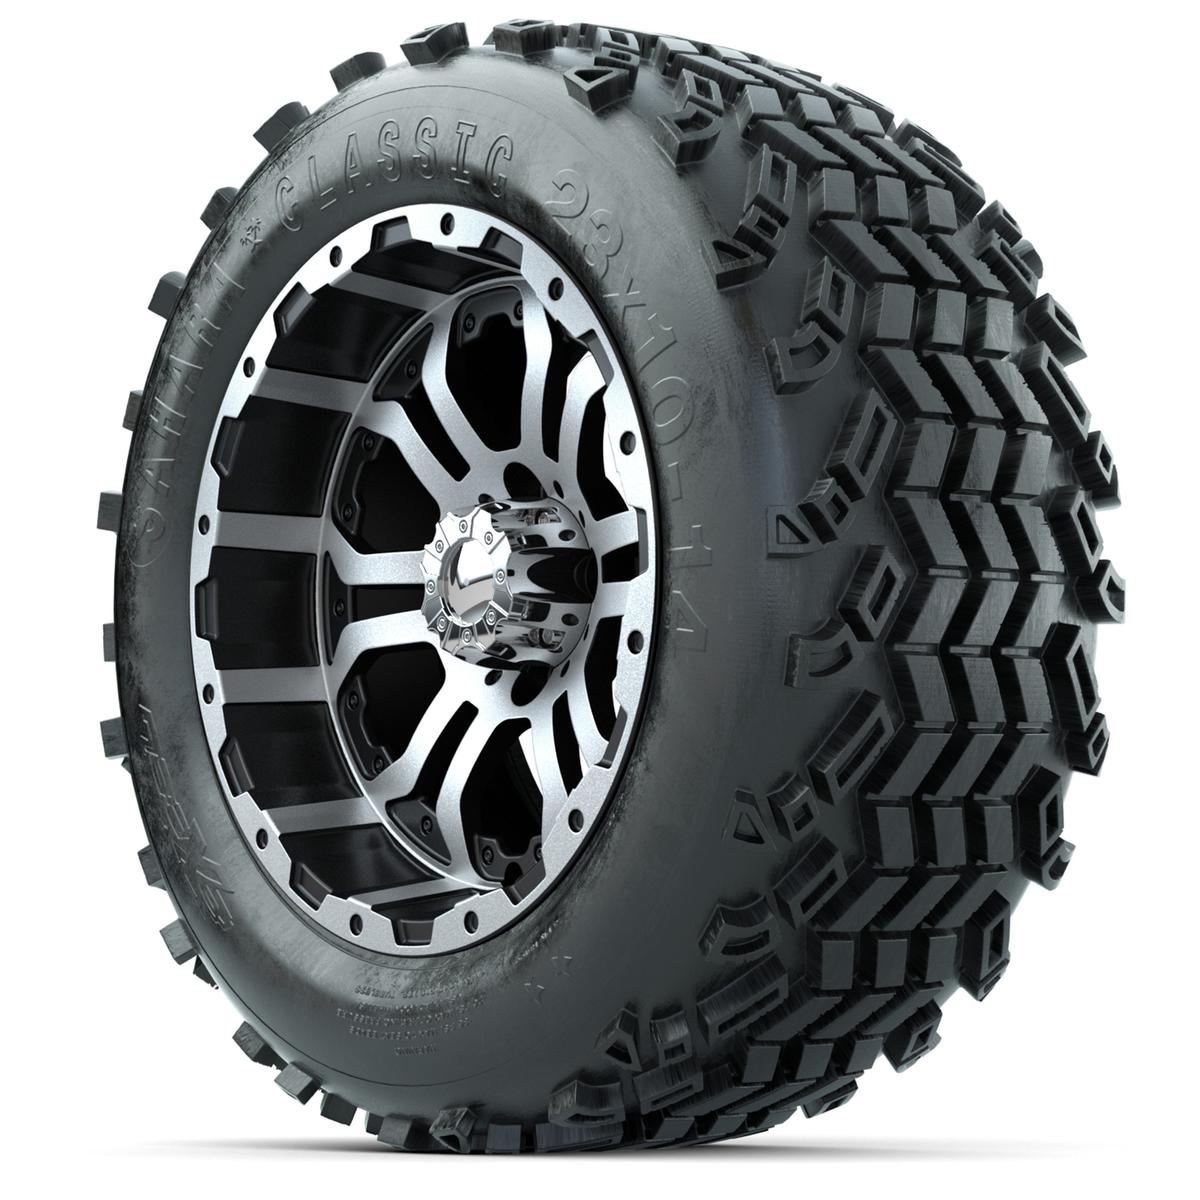 Set of (4) 14 in GTW Omega Wheels with 23x10-14 Sahara Classic All-Terrain Tires